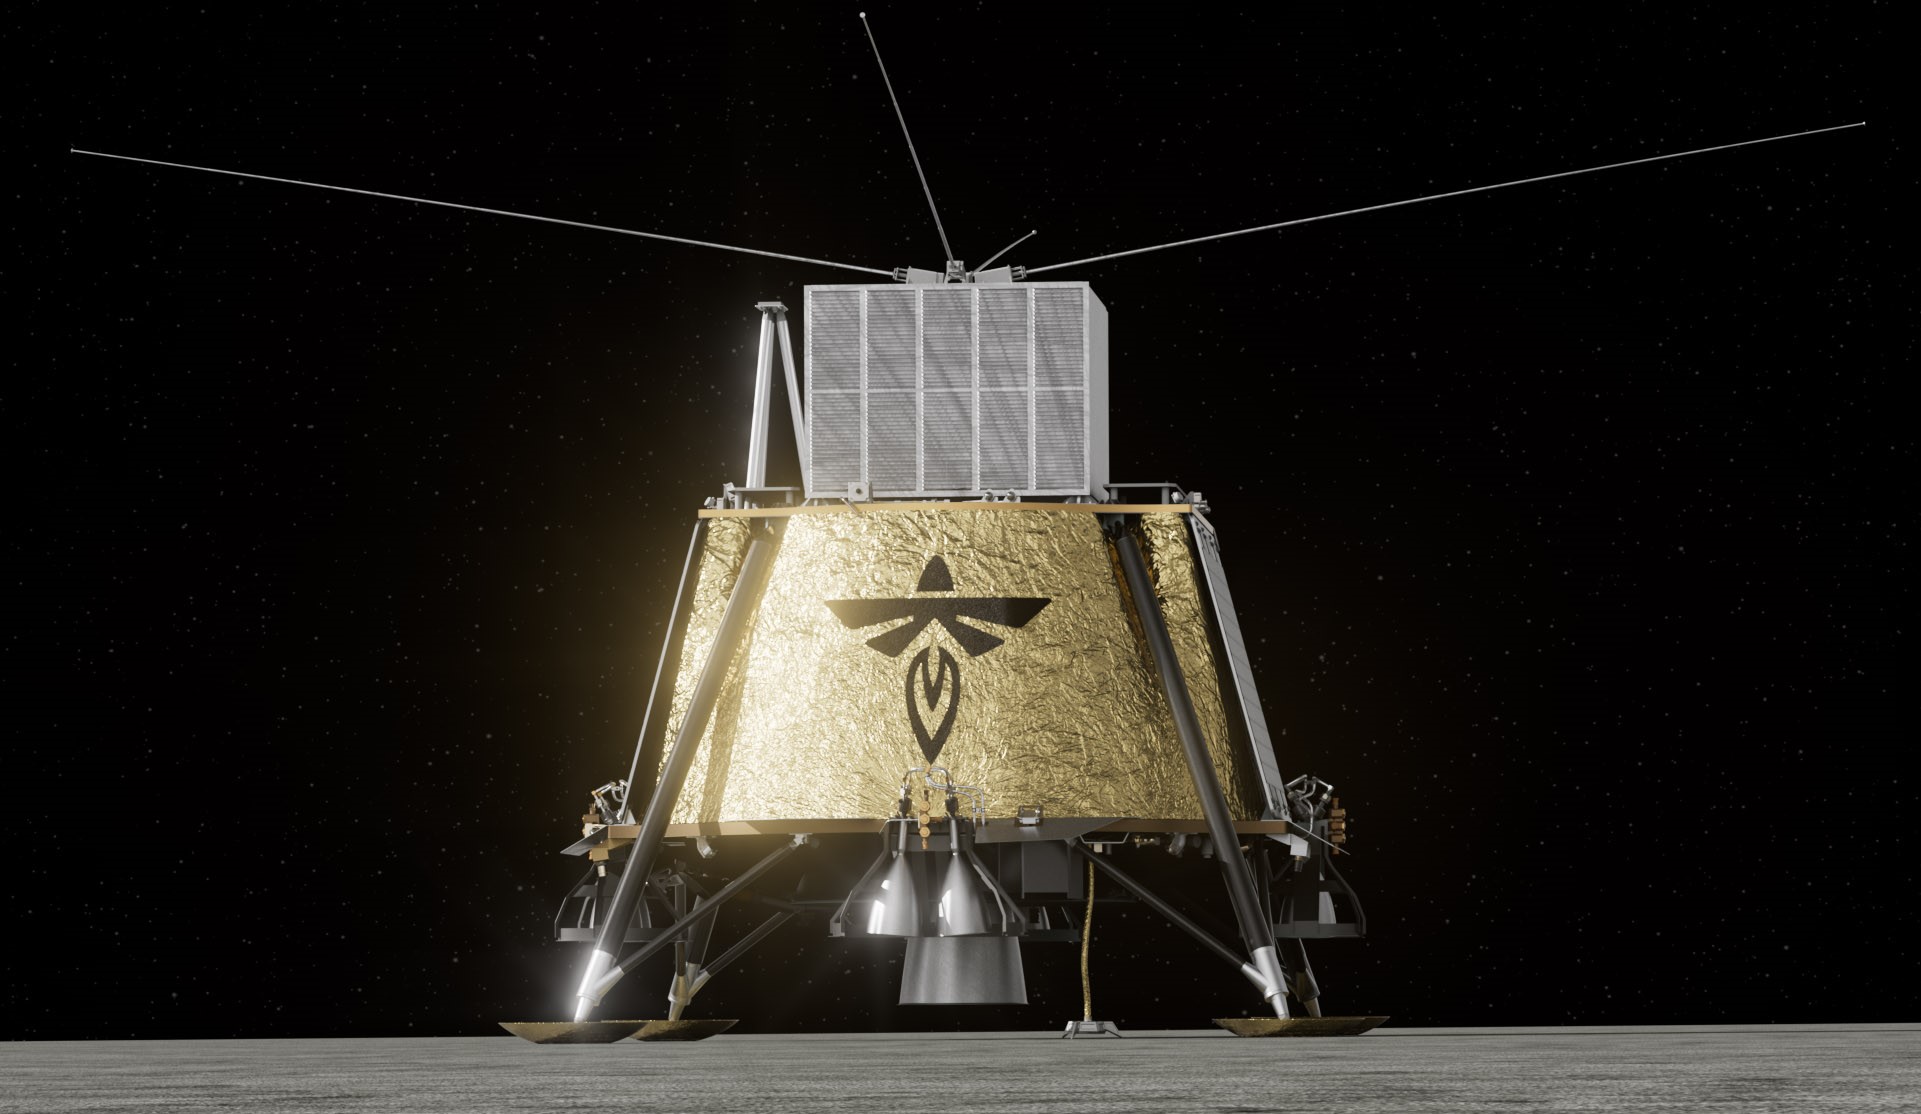 Rendering of Blue Ghost lunar lander on the far side of the Moon with the Fleet Space SPIDER payload deployed. Credit Firefly